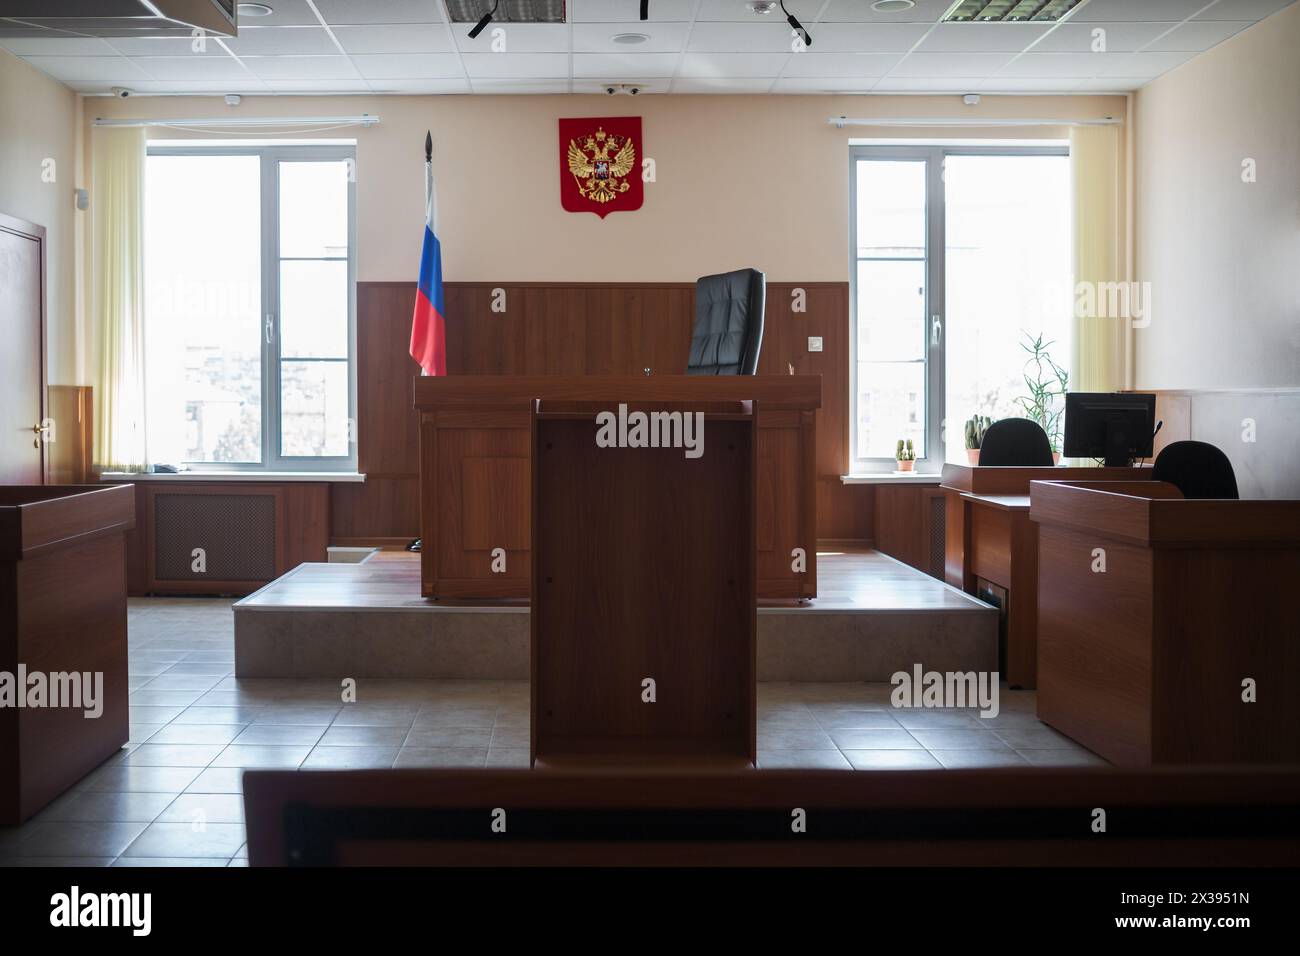 MOSCOW, RUSSIA - JUL 1, 2015: Wooden furniture in court of law with Russian coat of arms Stock Photo